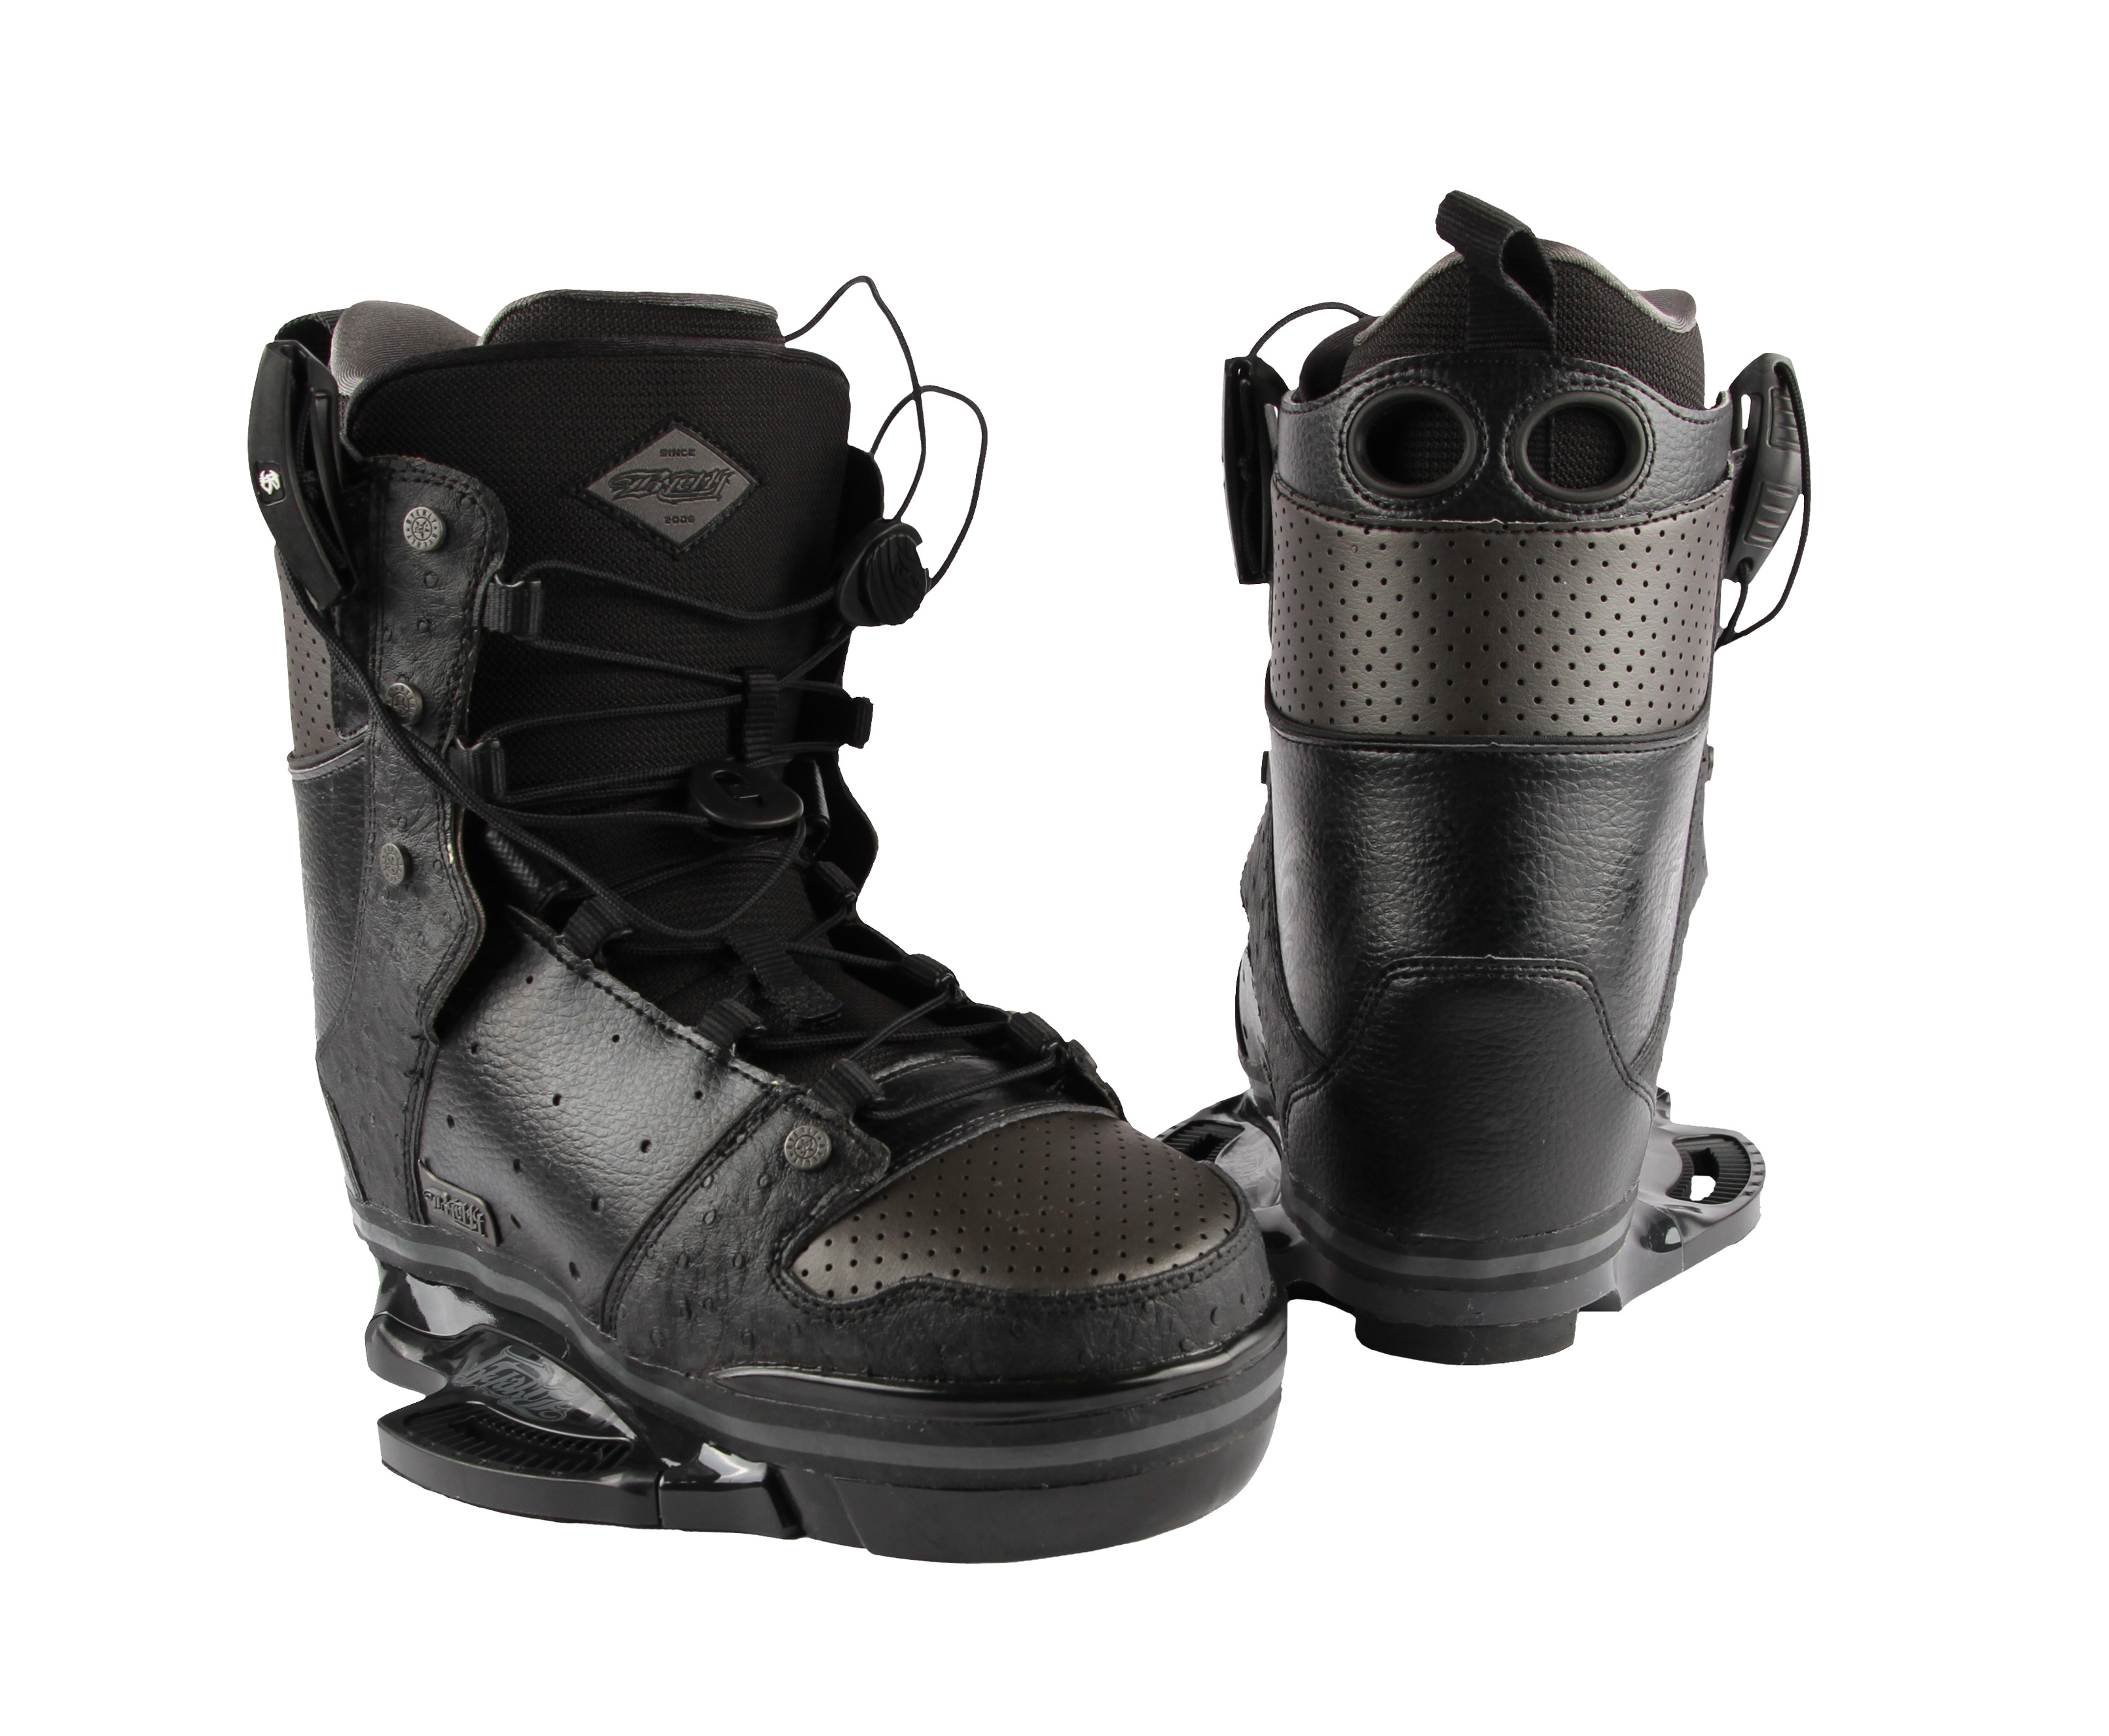   PRO BOOT-PAIR BYERLY 2012